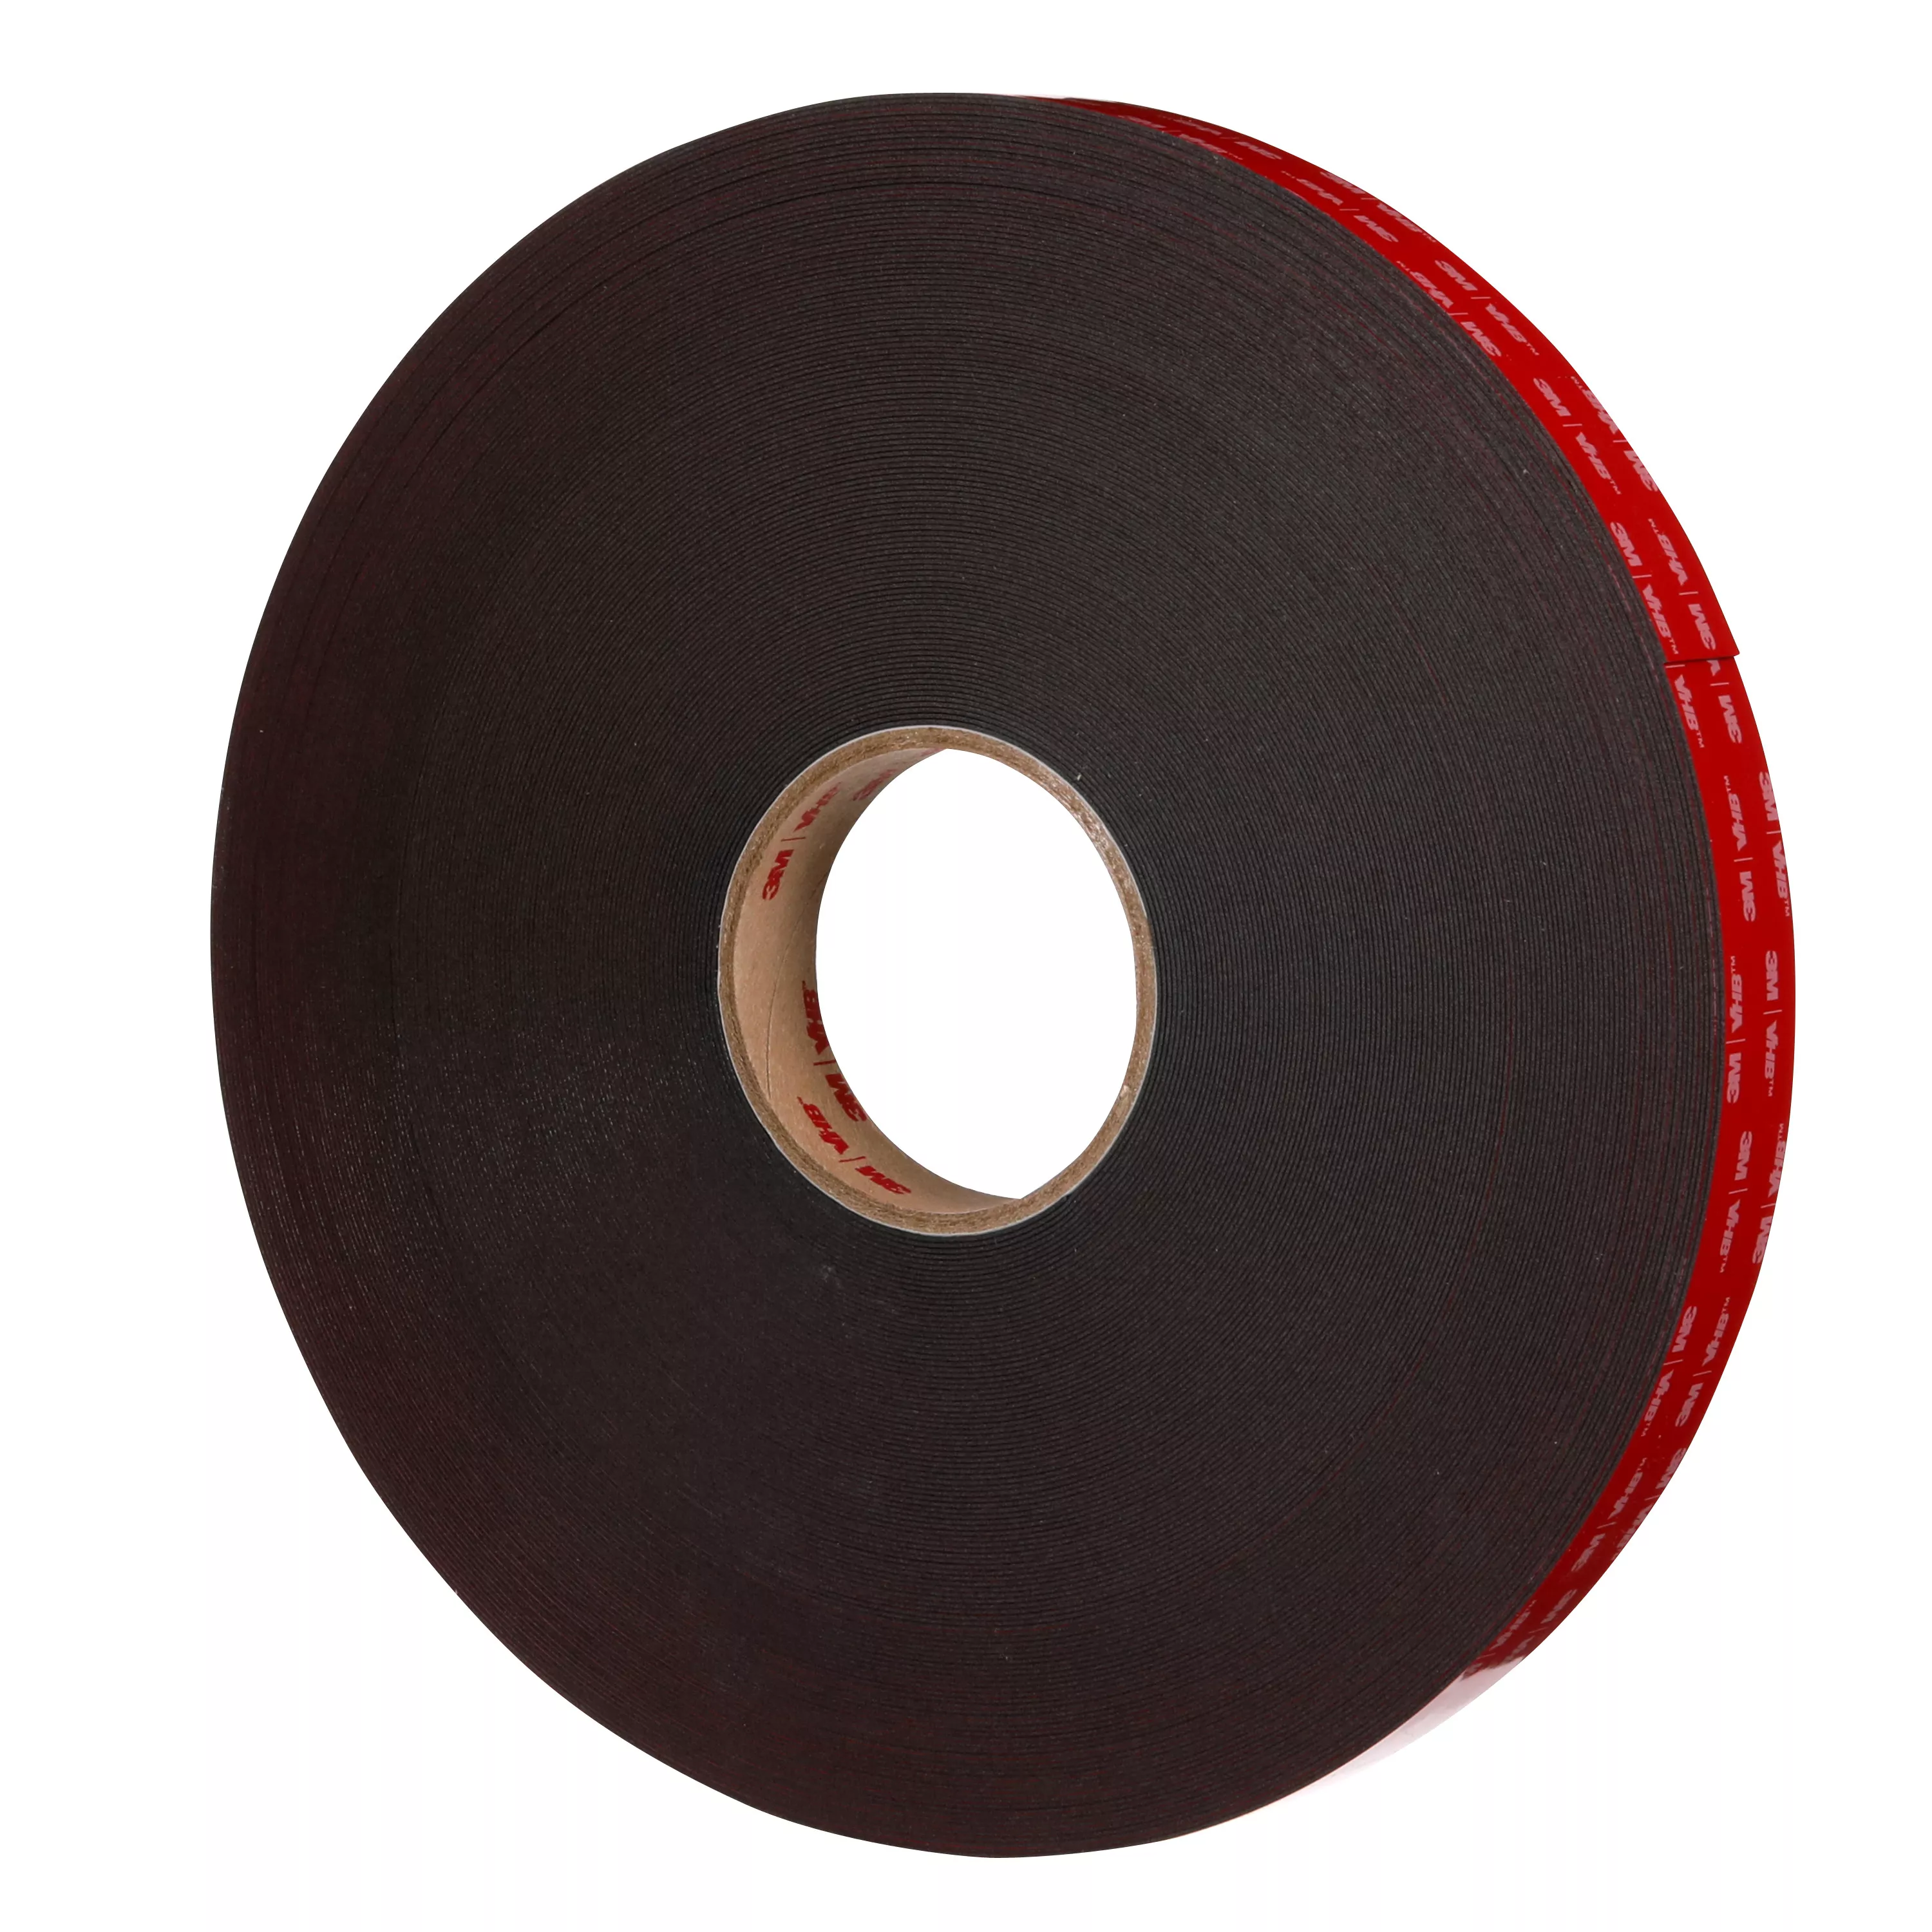 Product Number 4979 | 3M™ VHB™ Tape 4979F